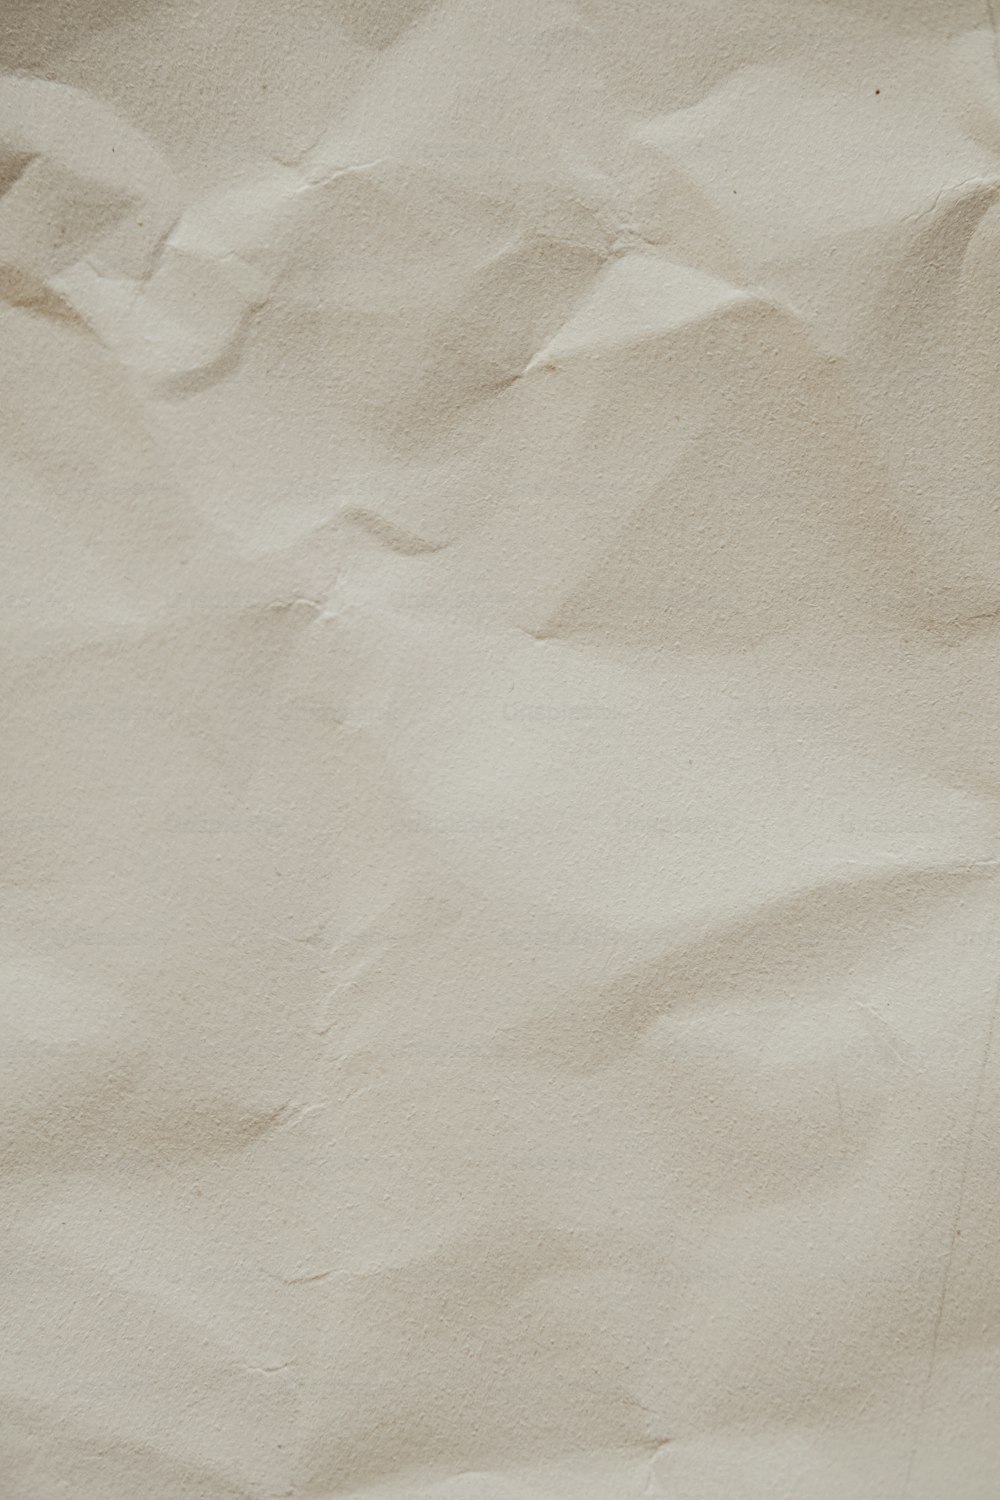 a cell phone laying on top of a piece of paper